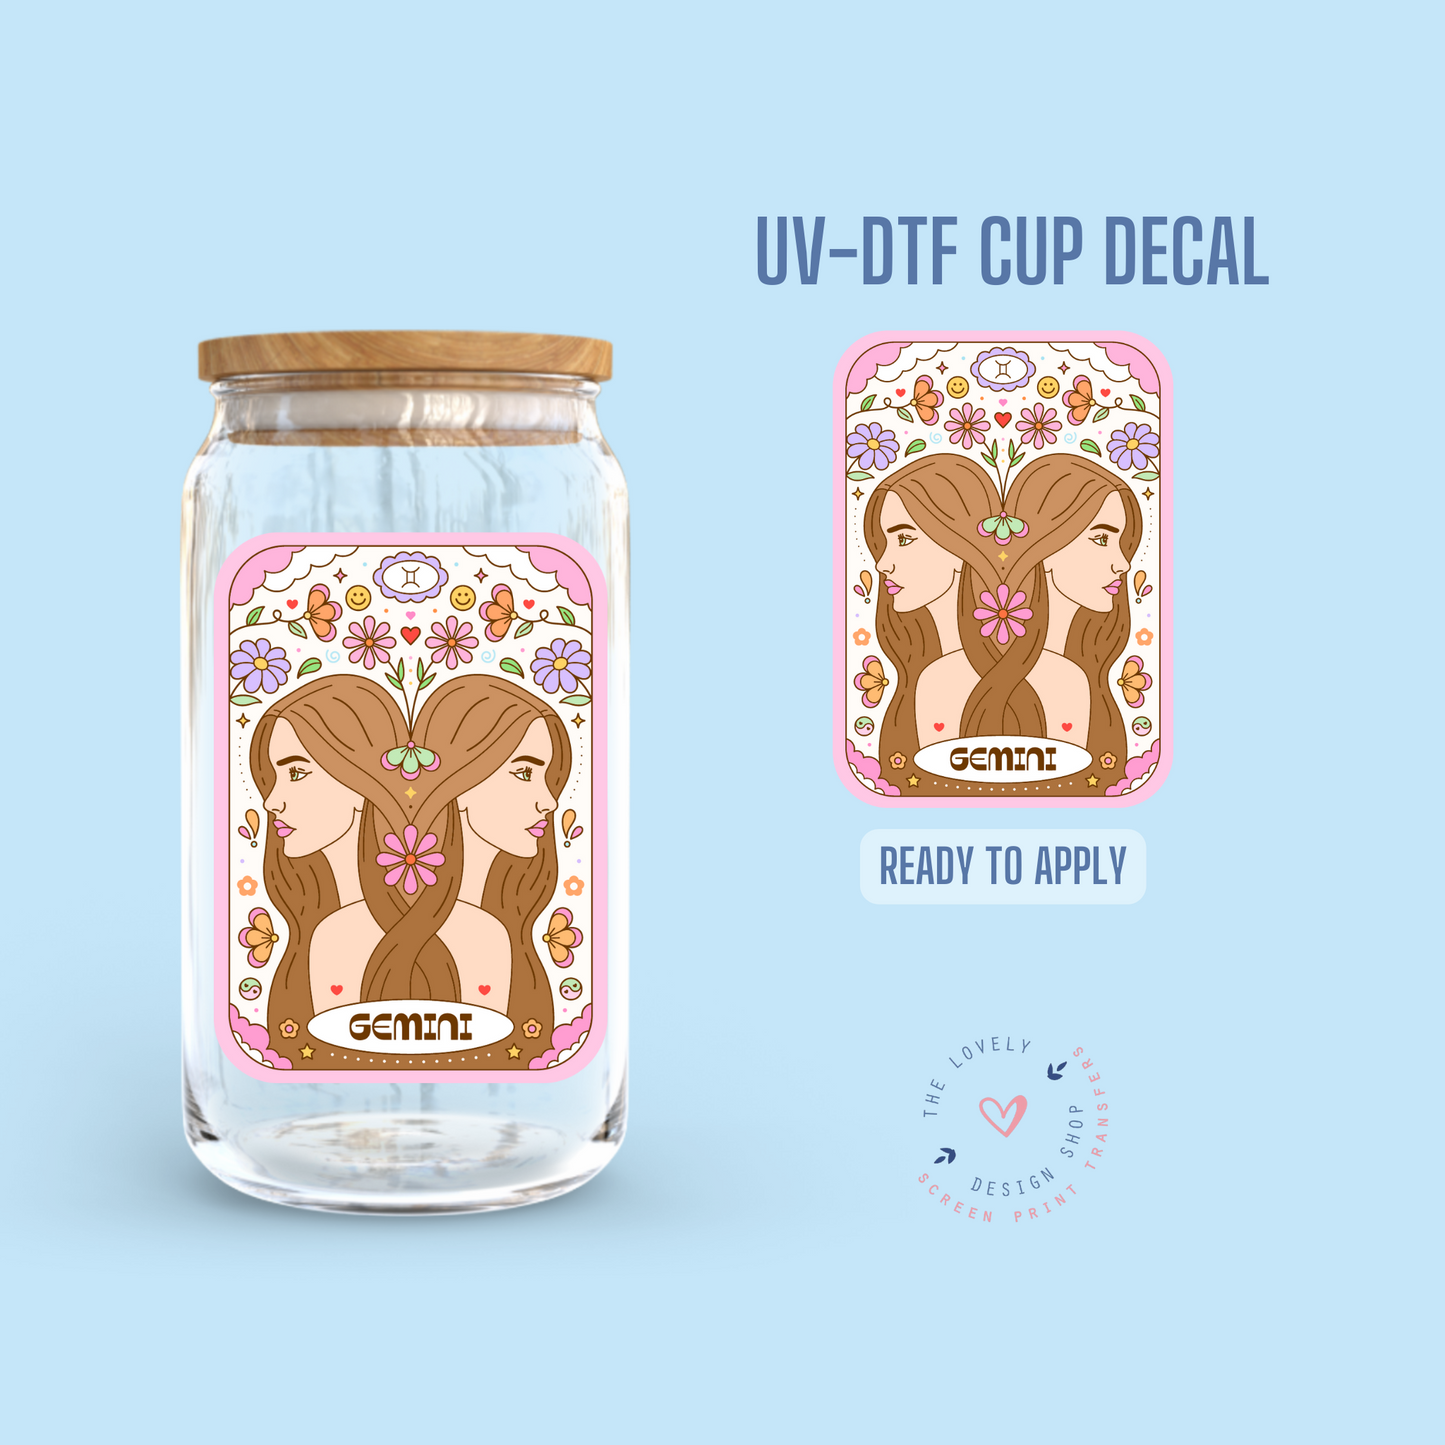 Zodiac Signs Tarot Cards Bundle - UV DTF Cup Decal (Ready to Ship) May 20